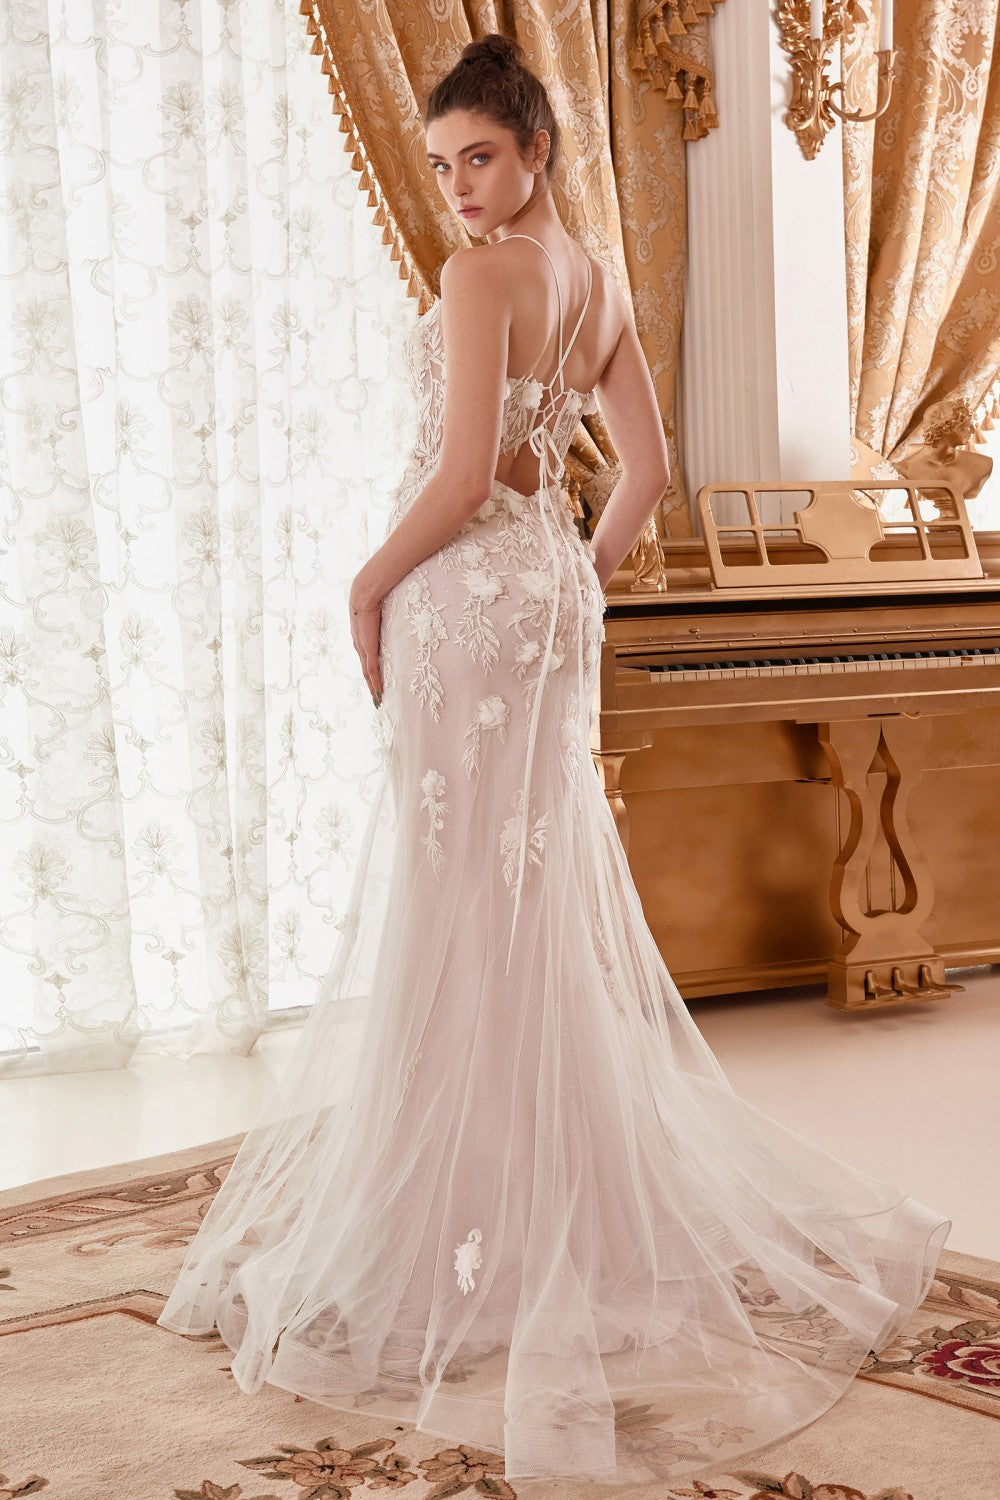 Beautifully draped off the shoulder wedding gown with an overskirt to give a pure look of elegance.